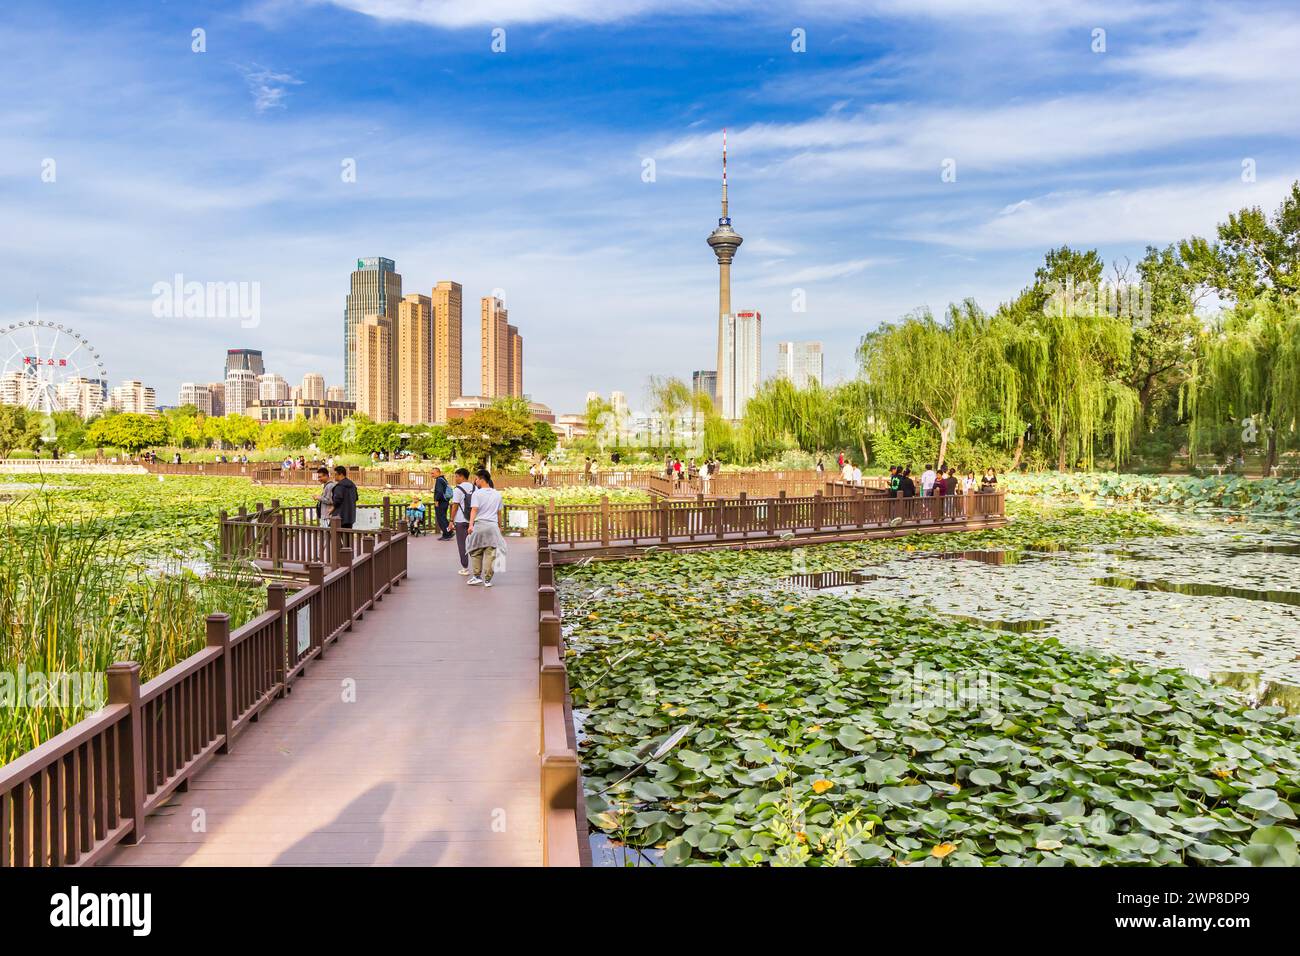 Boardwalk in the lily pond of Shuishang Park, Tianjin, China Stock Photo